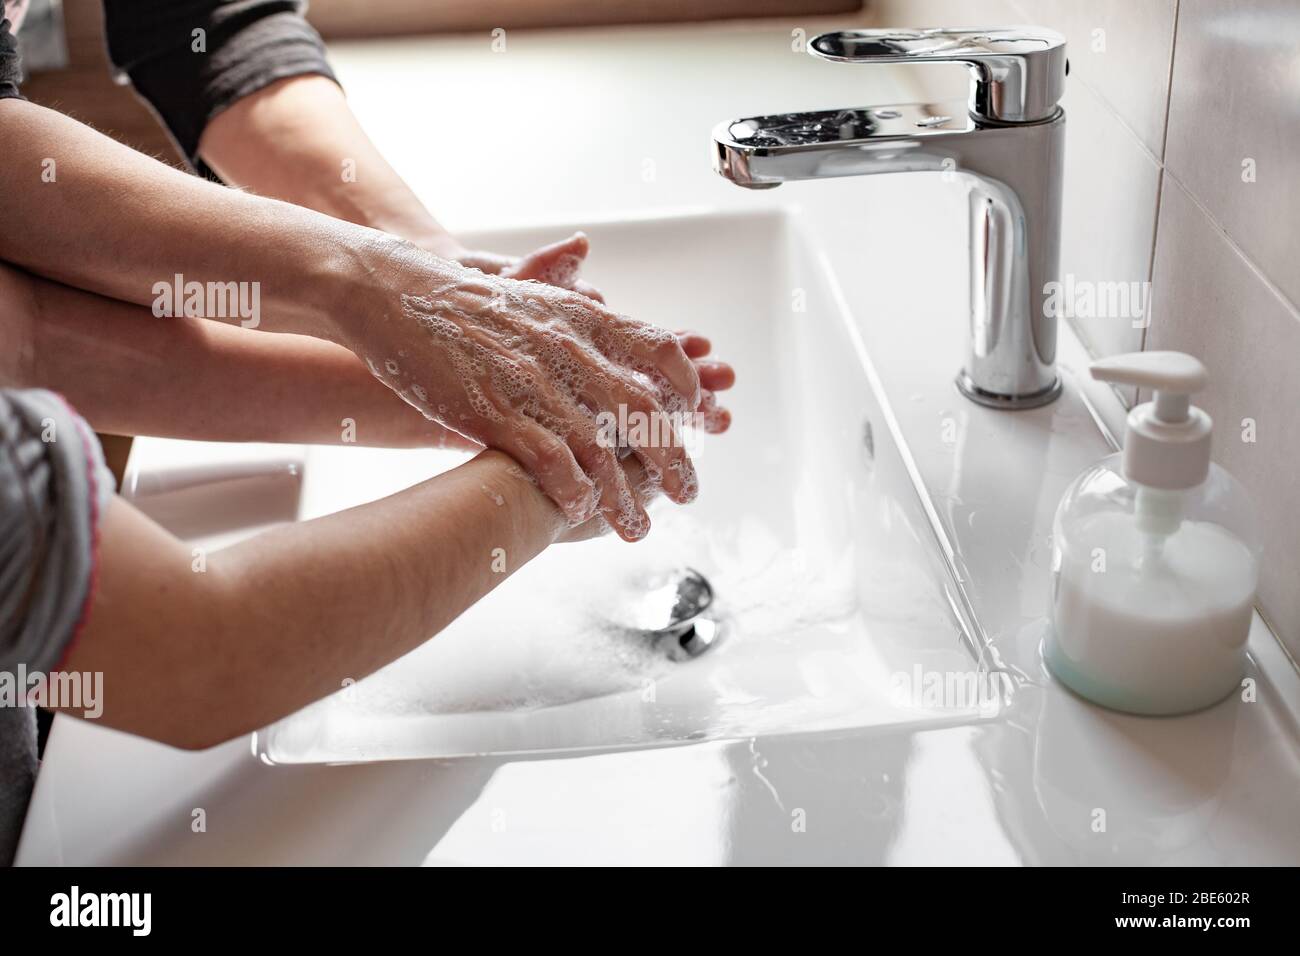 Mother teaching her daughter how to properly wash their hands with soap to prevent coronavirus infection Stock Photo